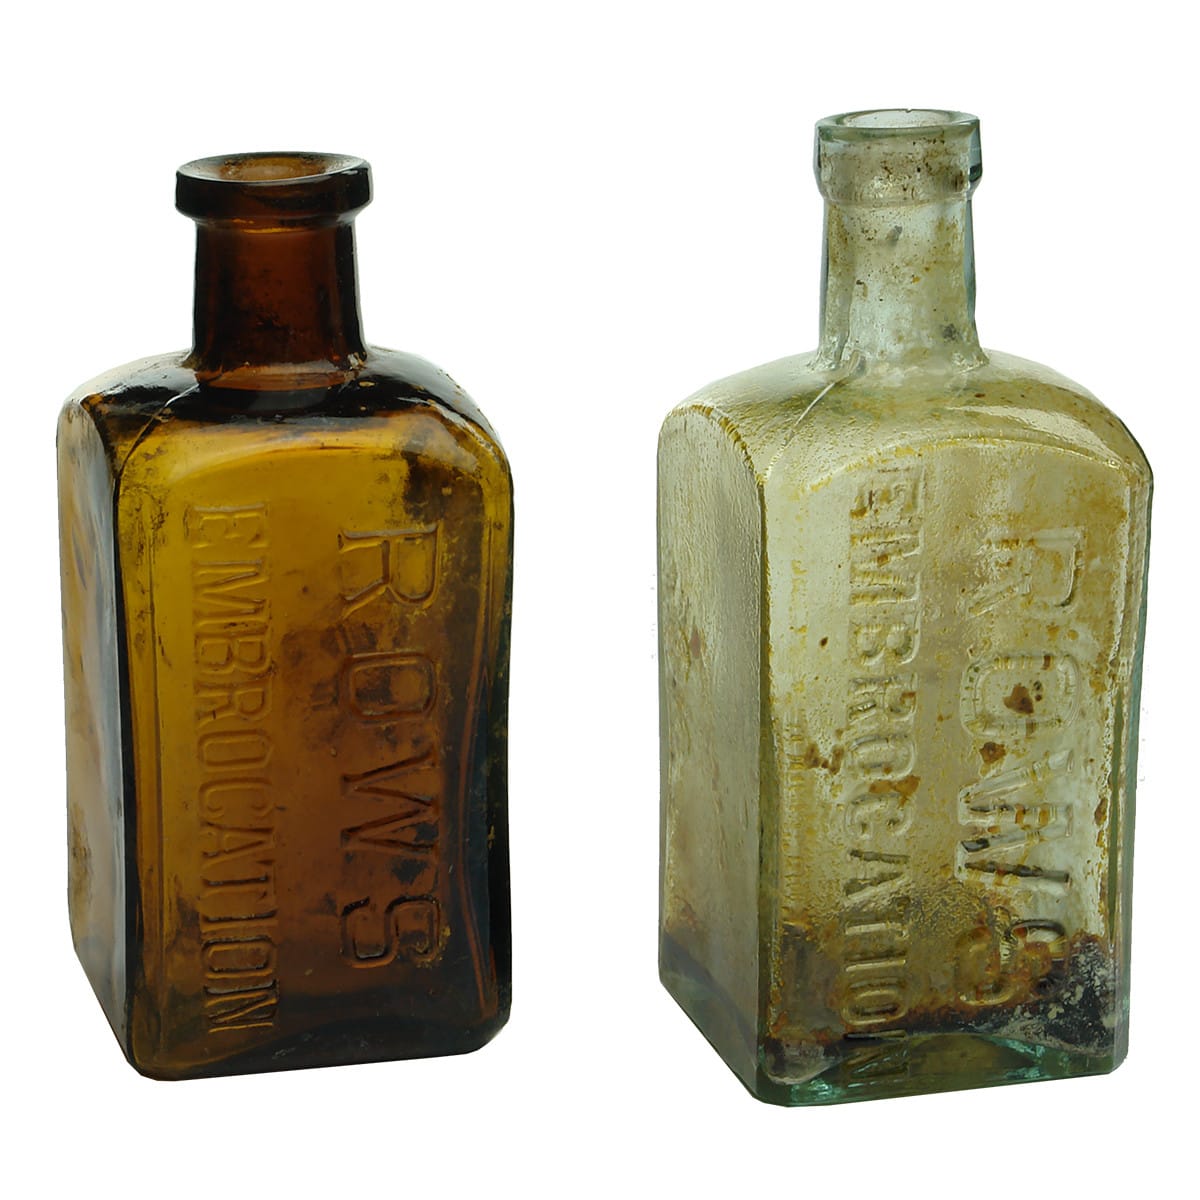 Pair of Rows Embrocation bottles. Aqua & Amber.